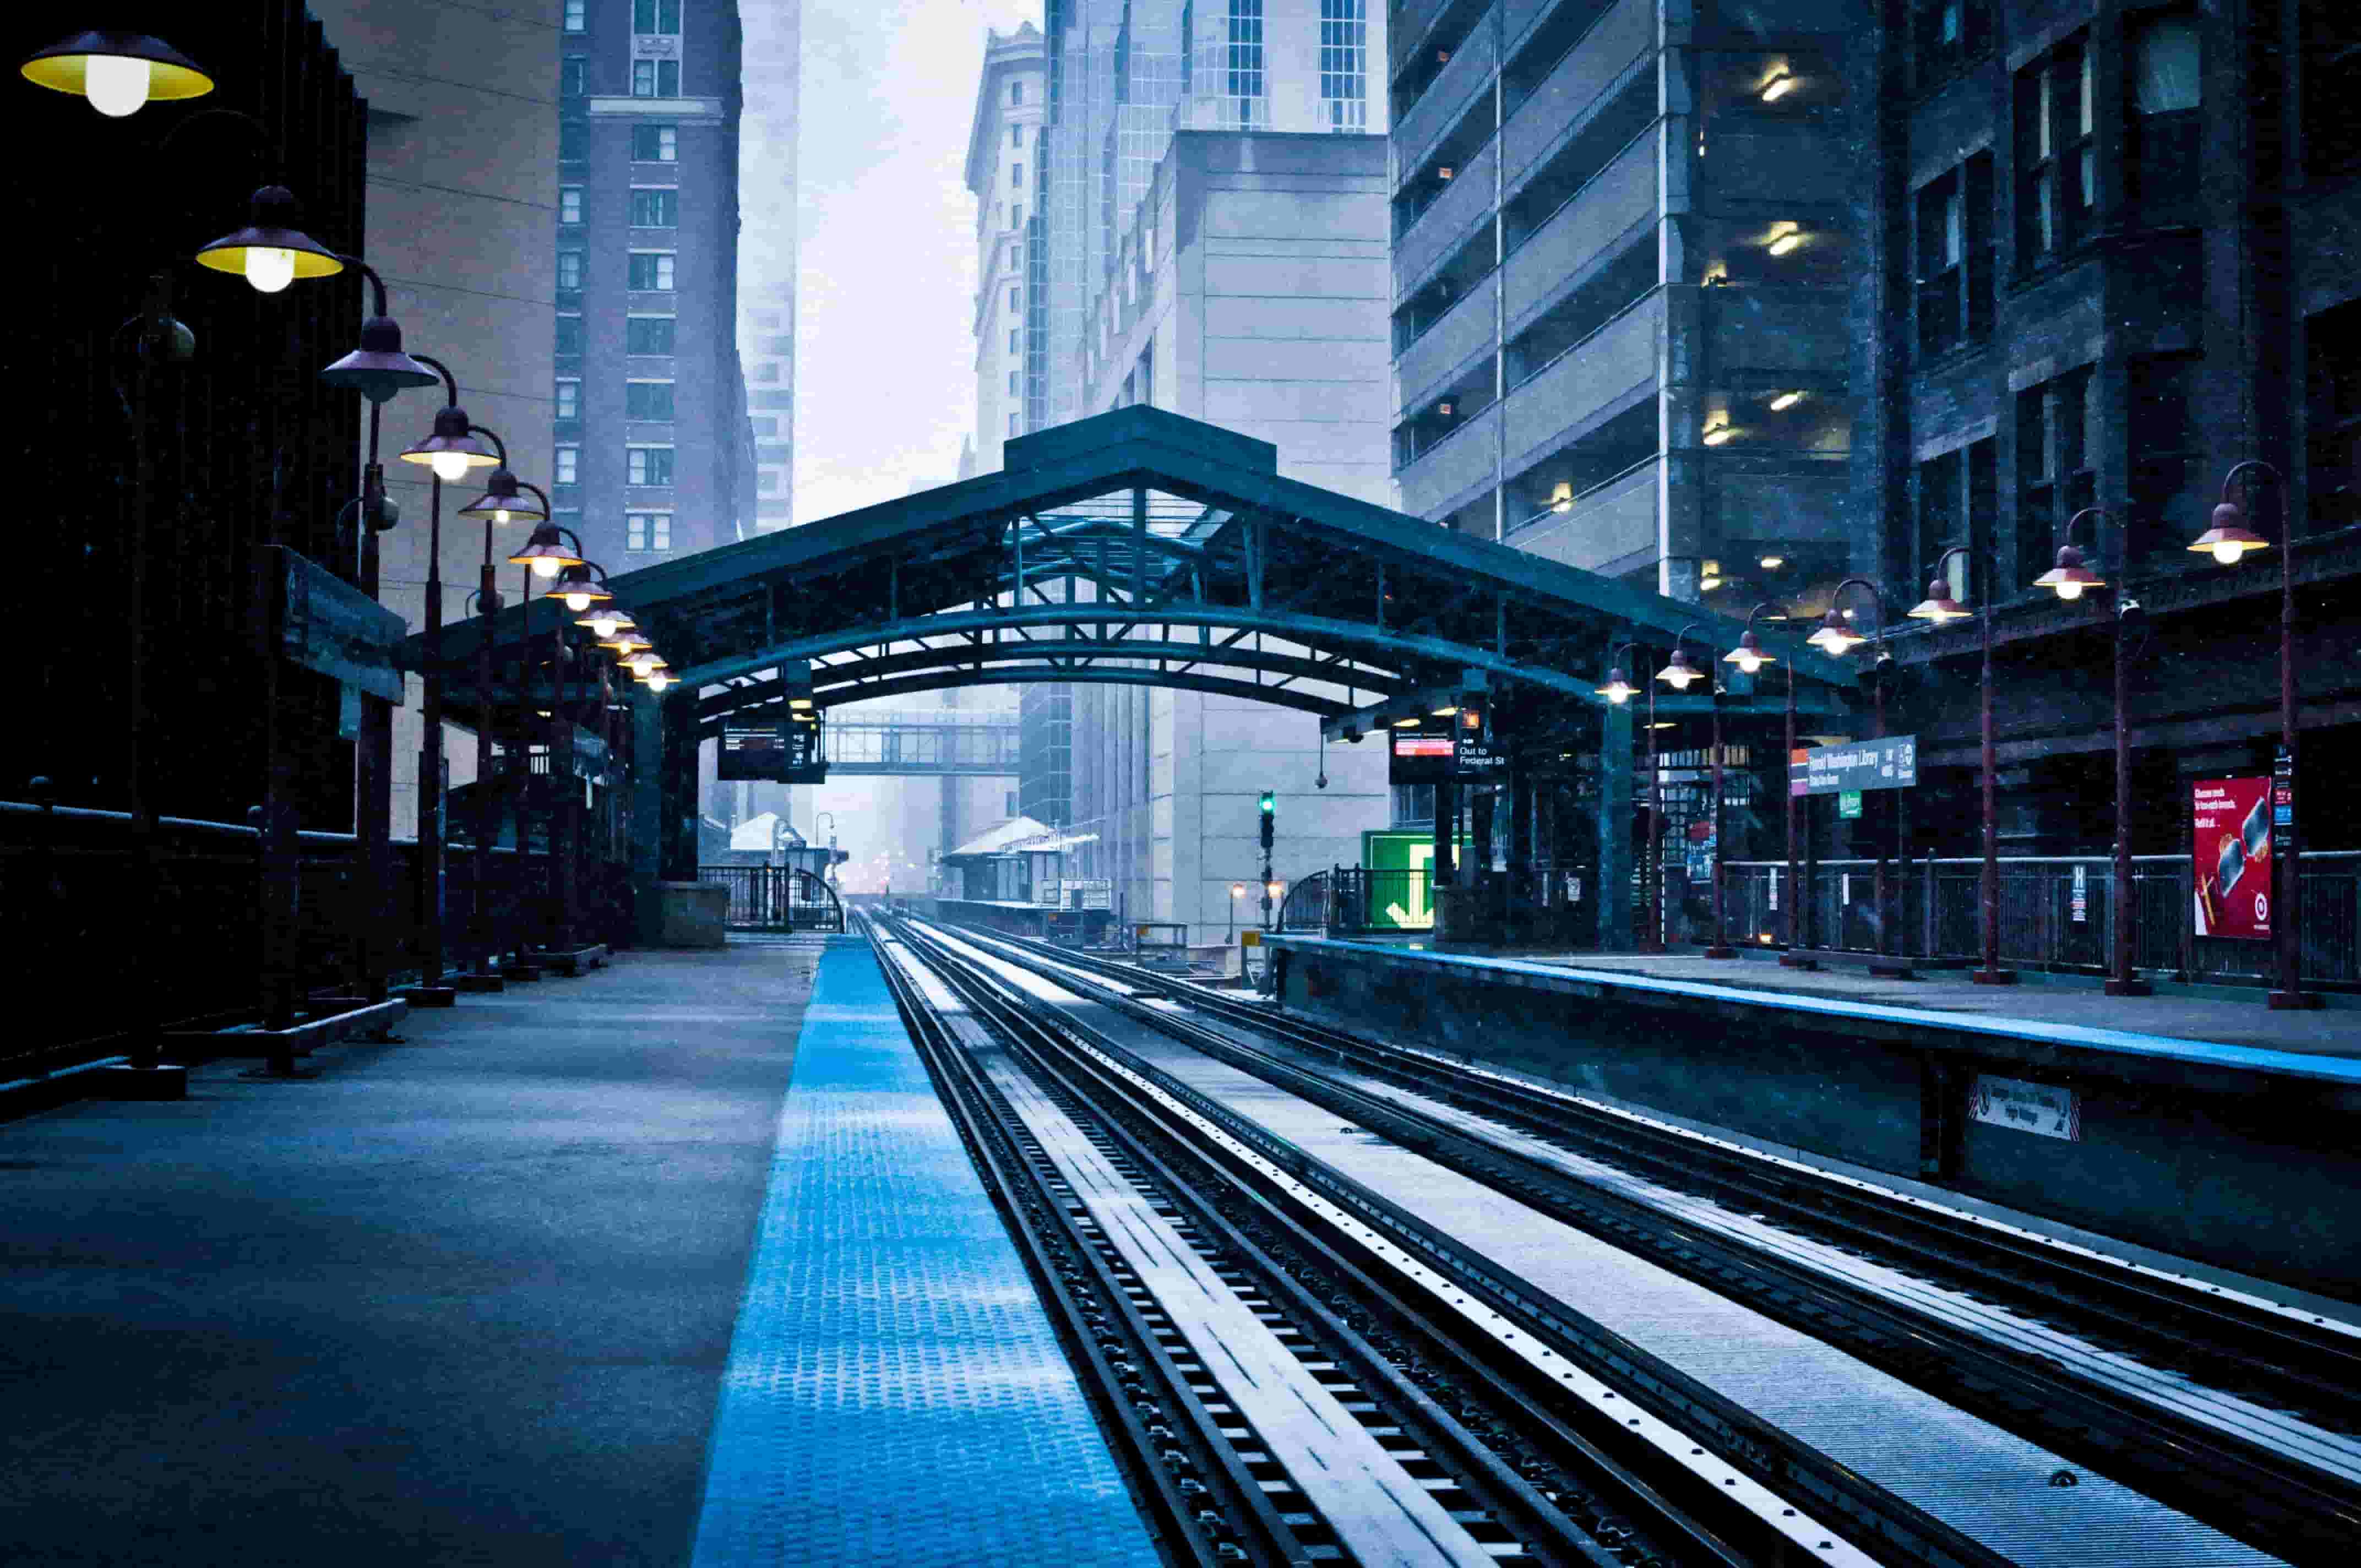 Elevated train station in Chicago in winter